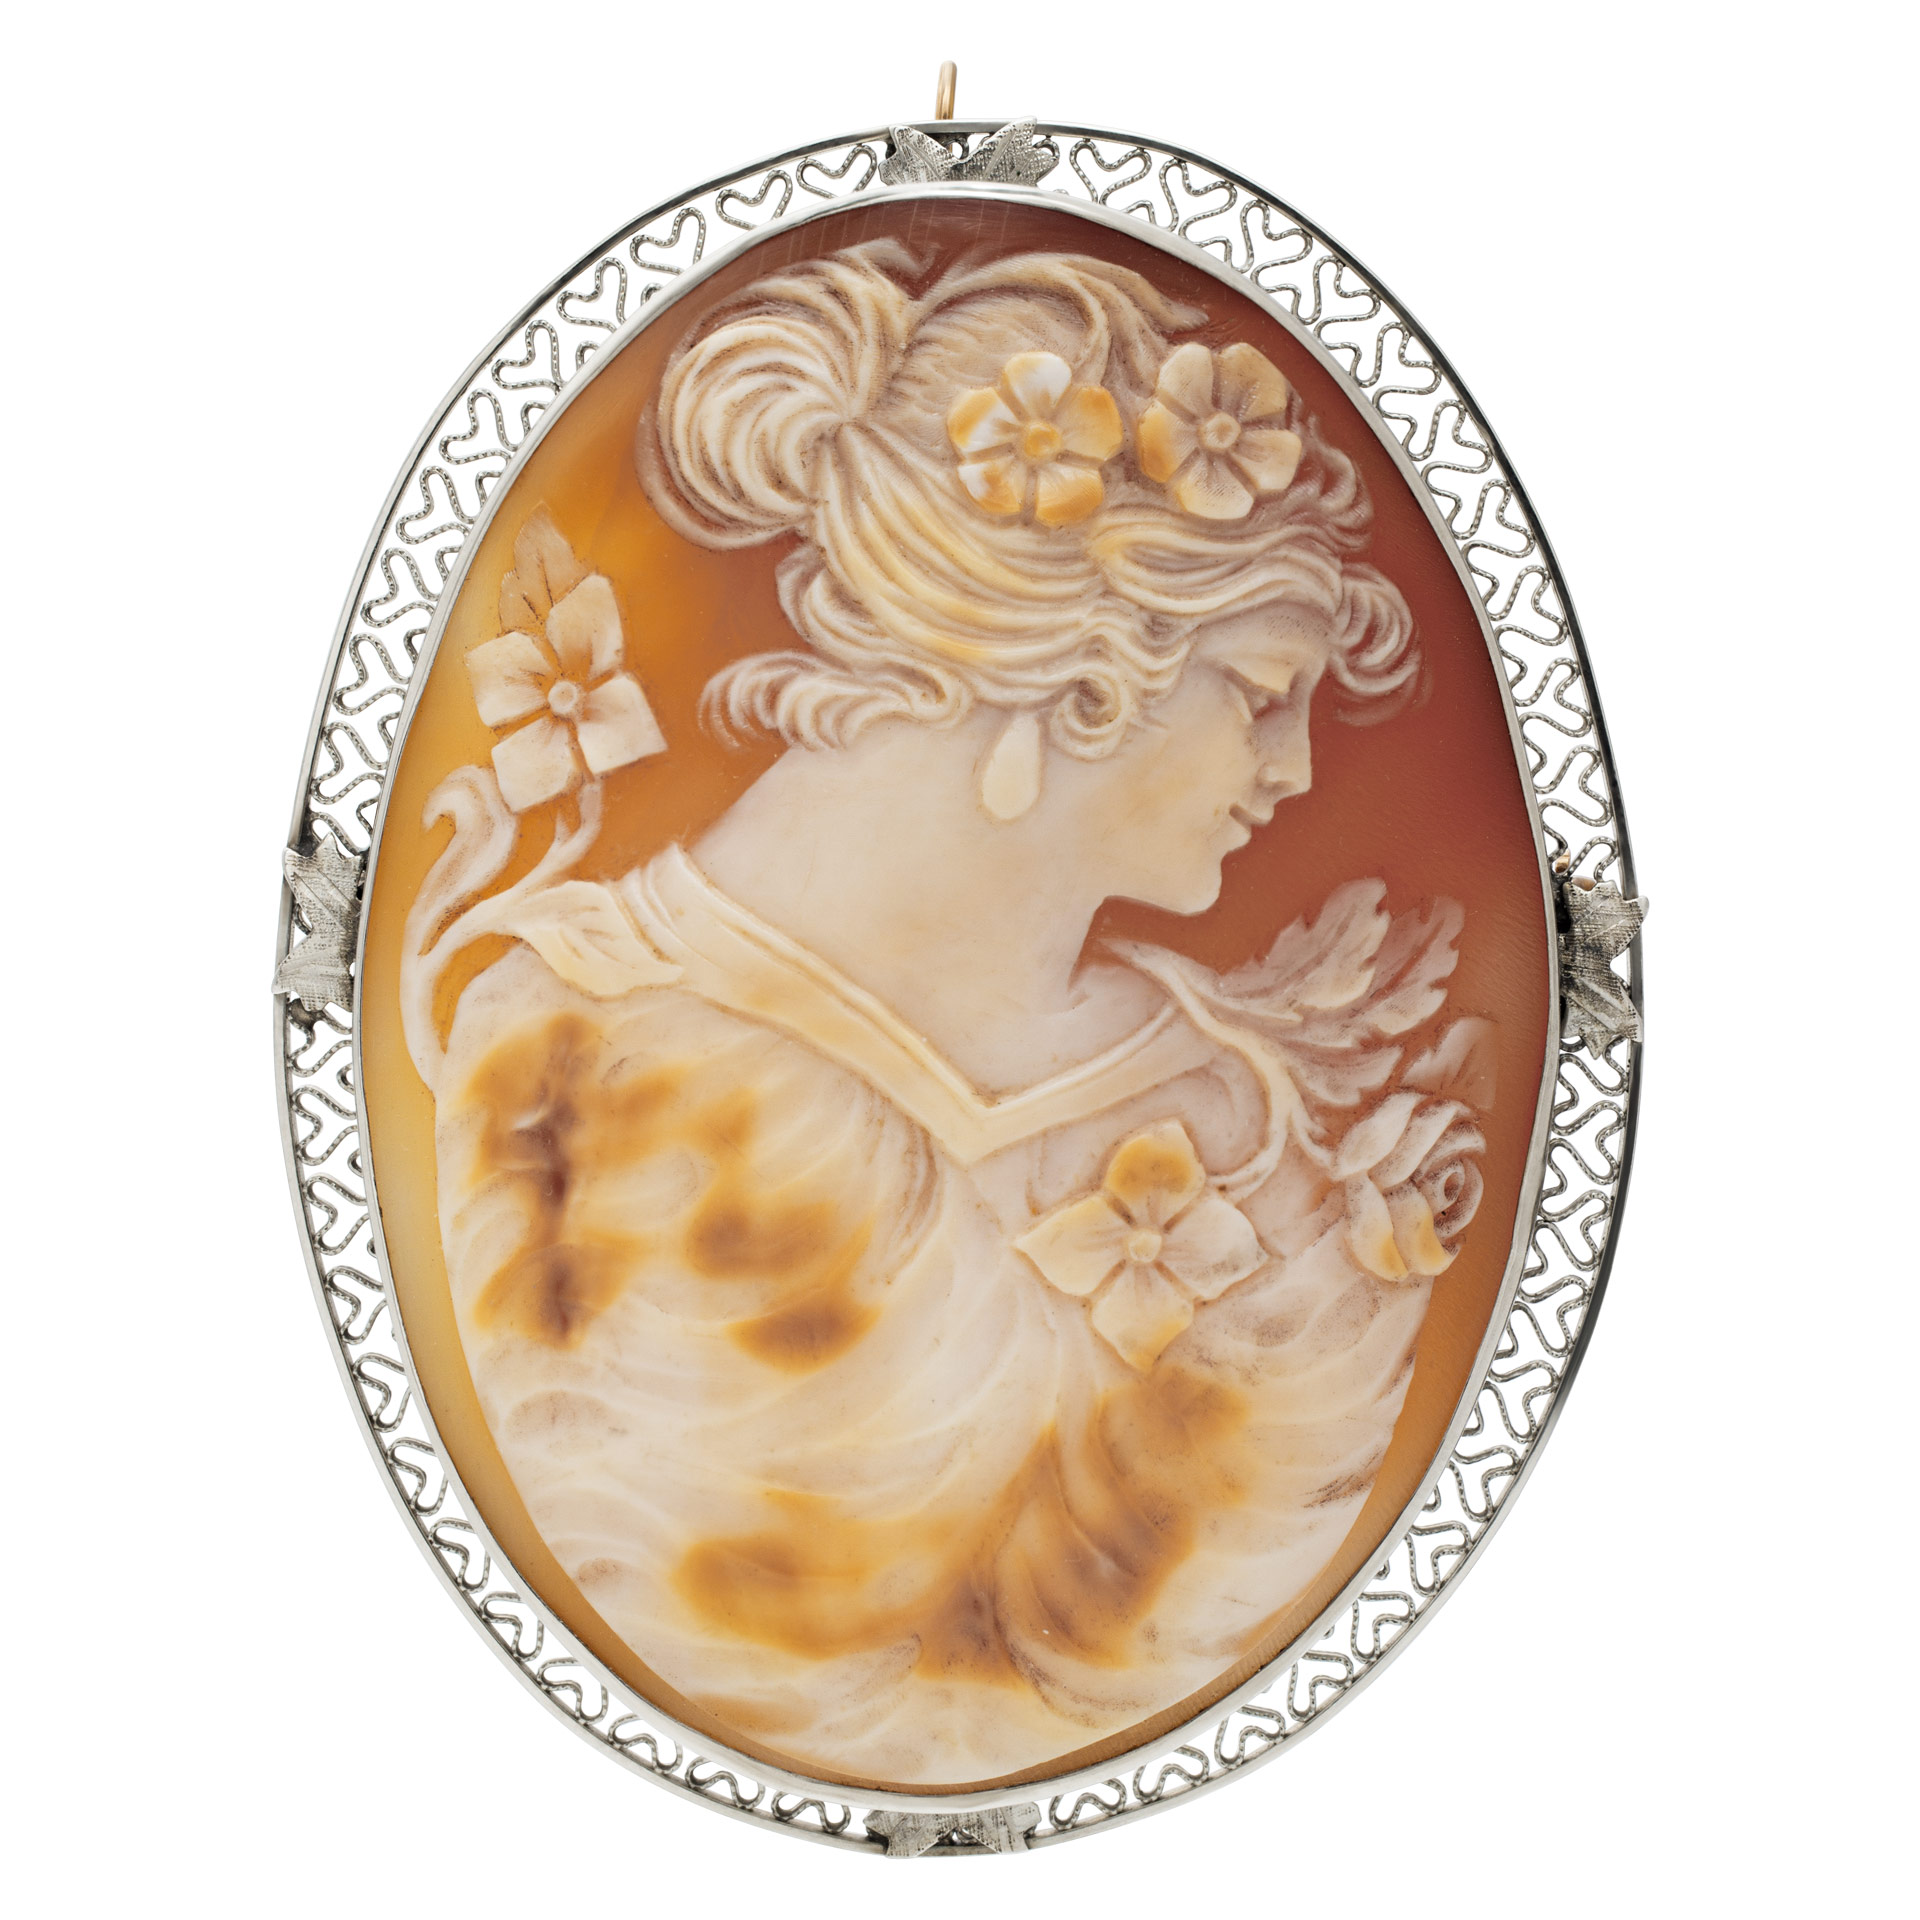 Cameo in 14k white gold with an intricate design